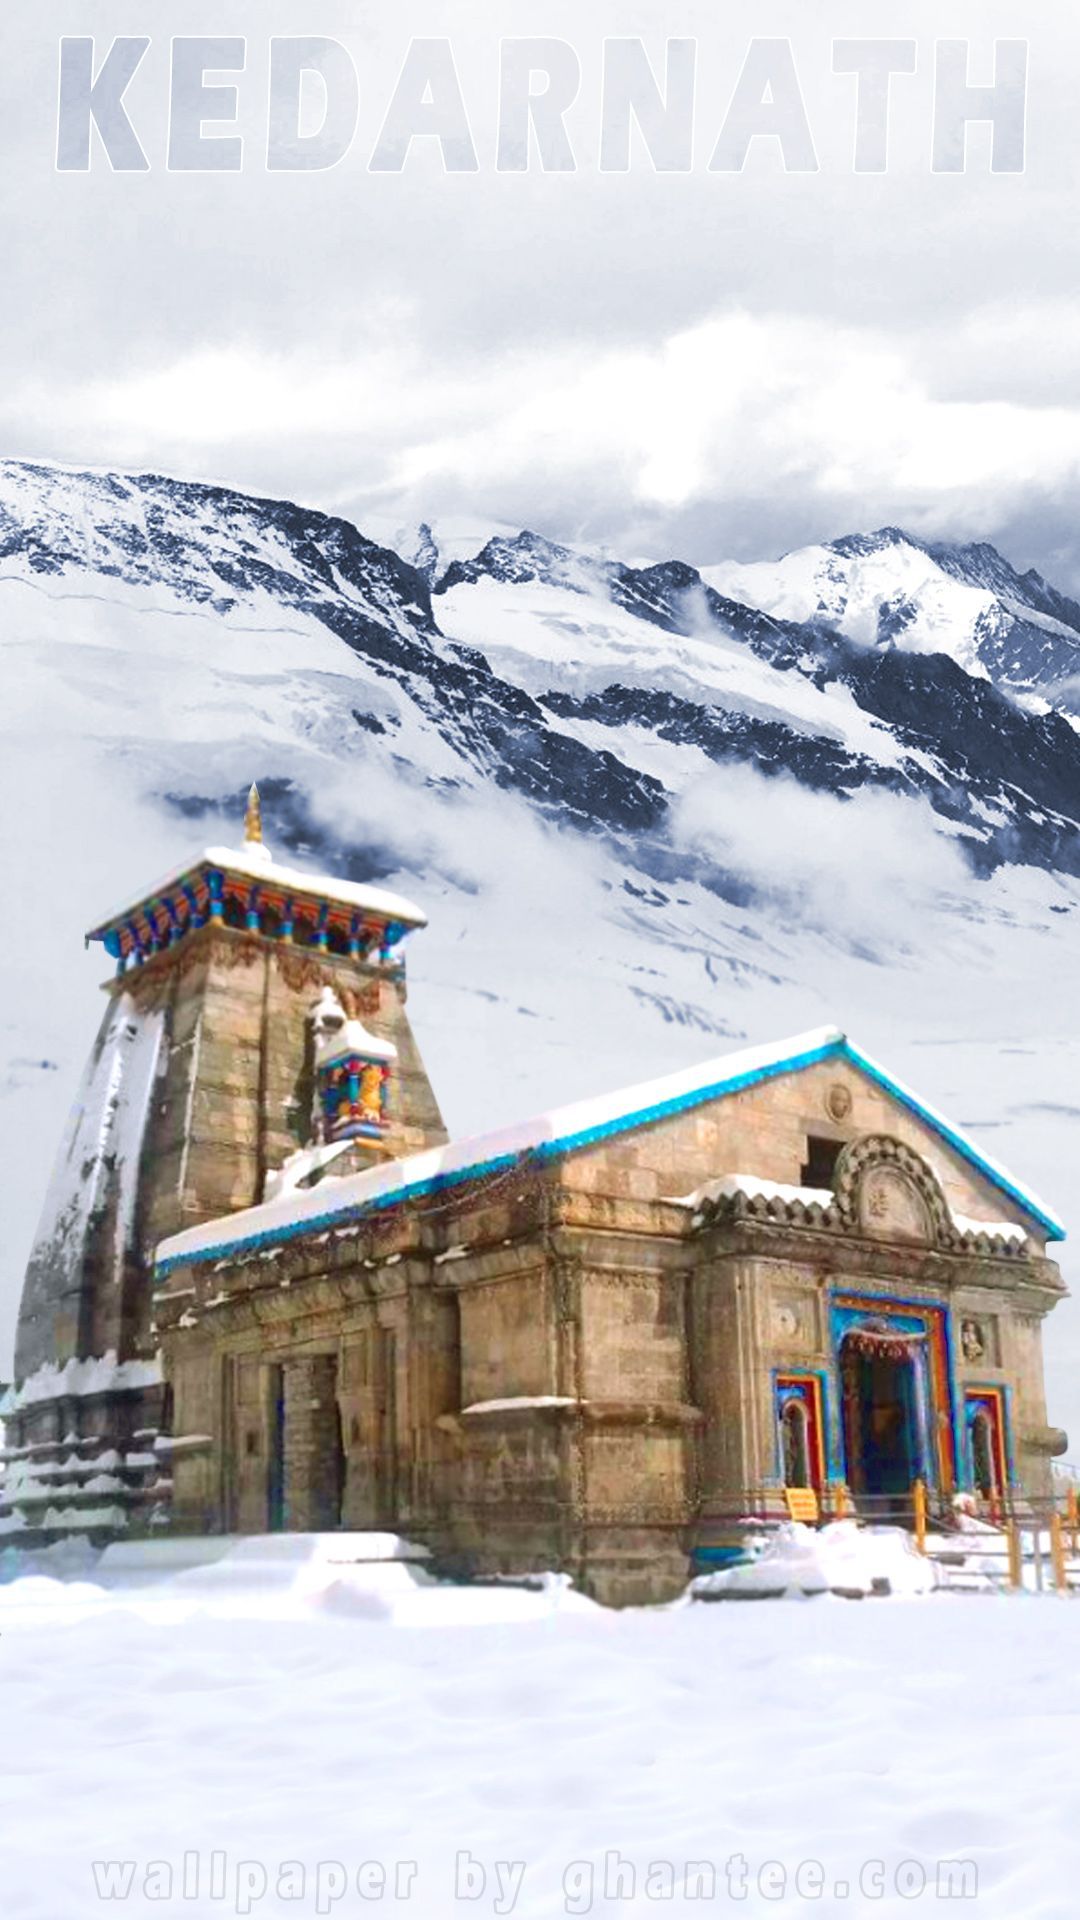 kedarnath wallpaper for android devices and iphones. Lord shiva HD wallpaper, Temple photography, Shiva wallpaper